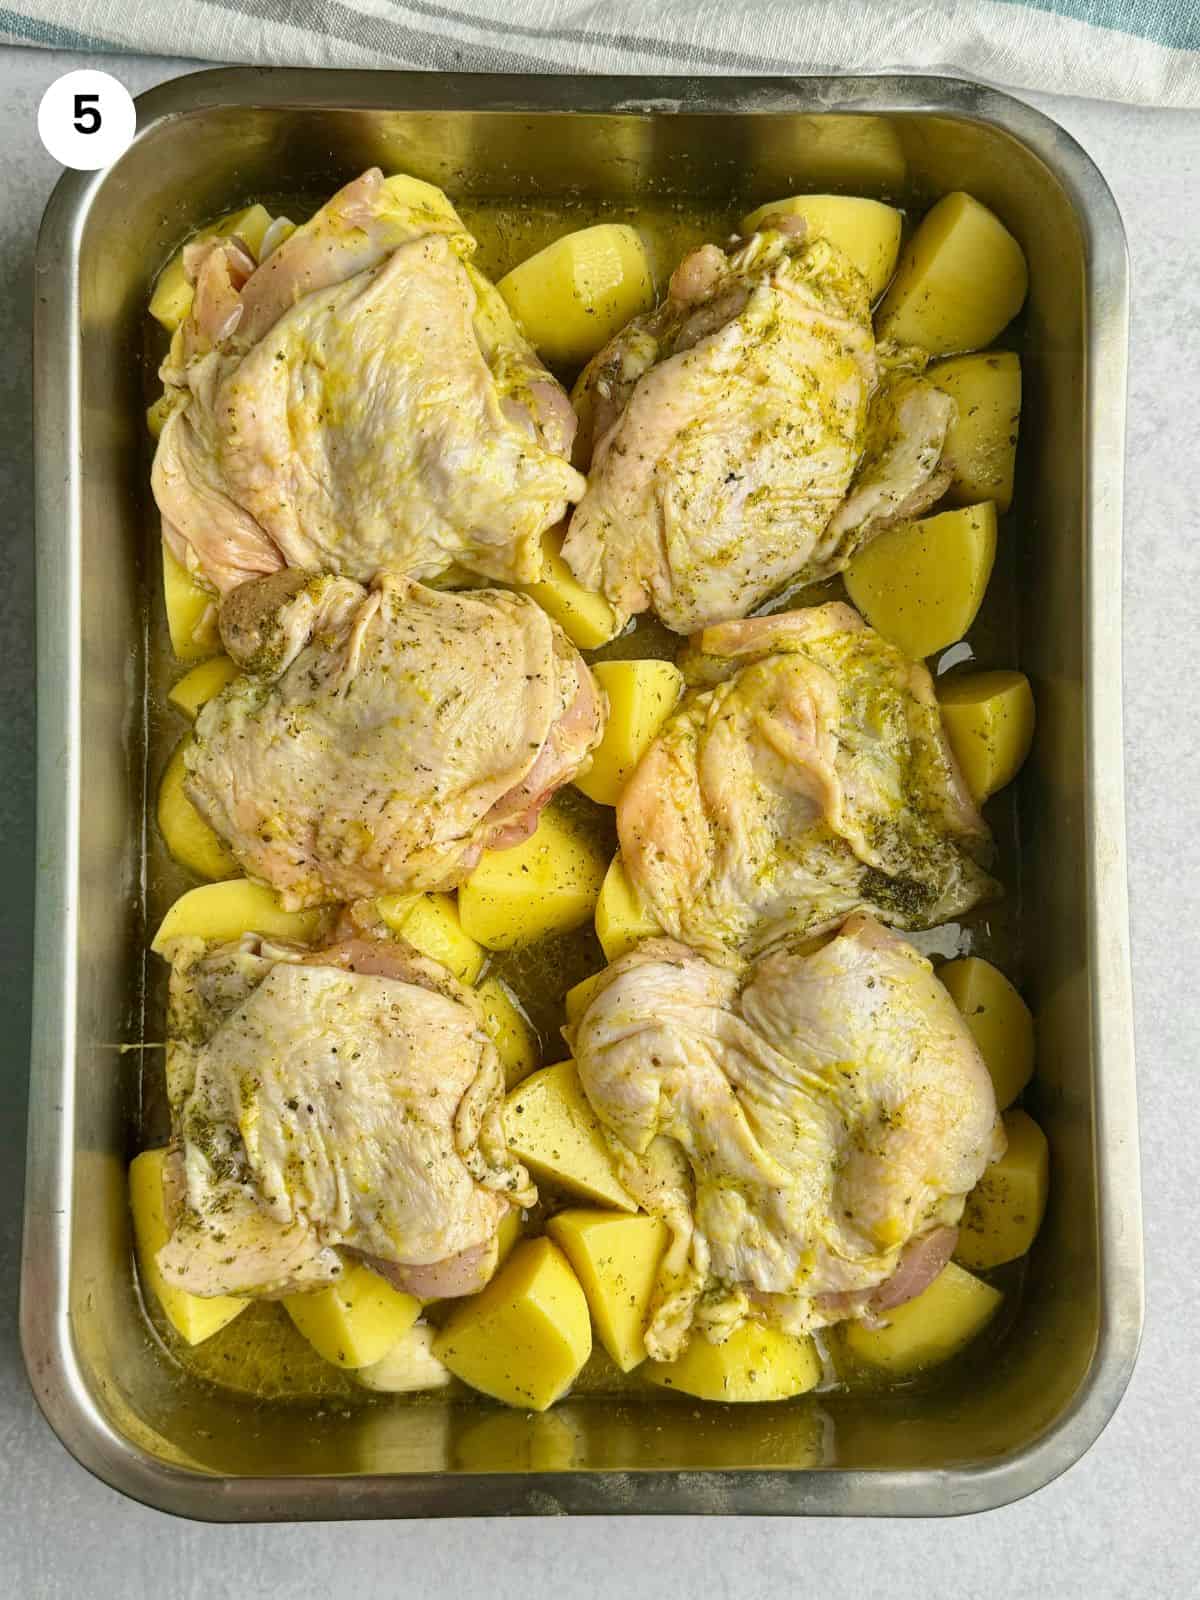 Chicken with potatoes ready to go in the oven.